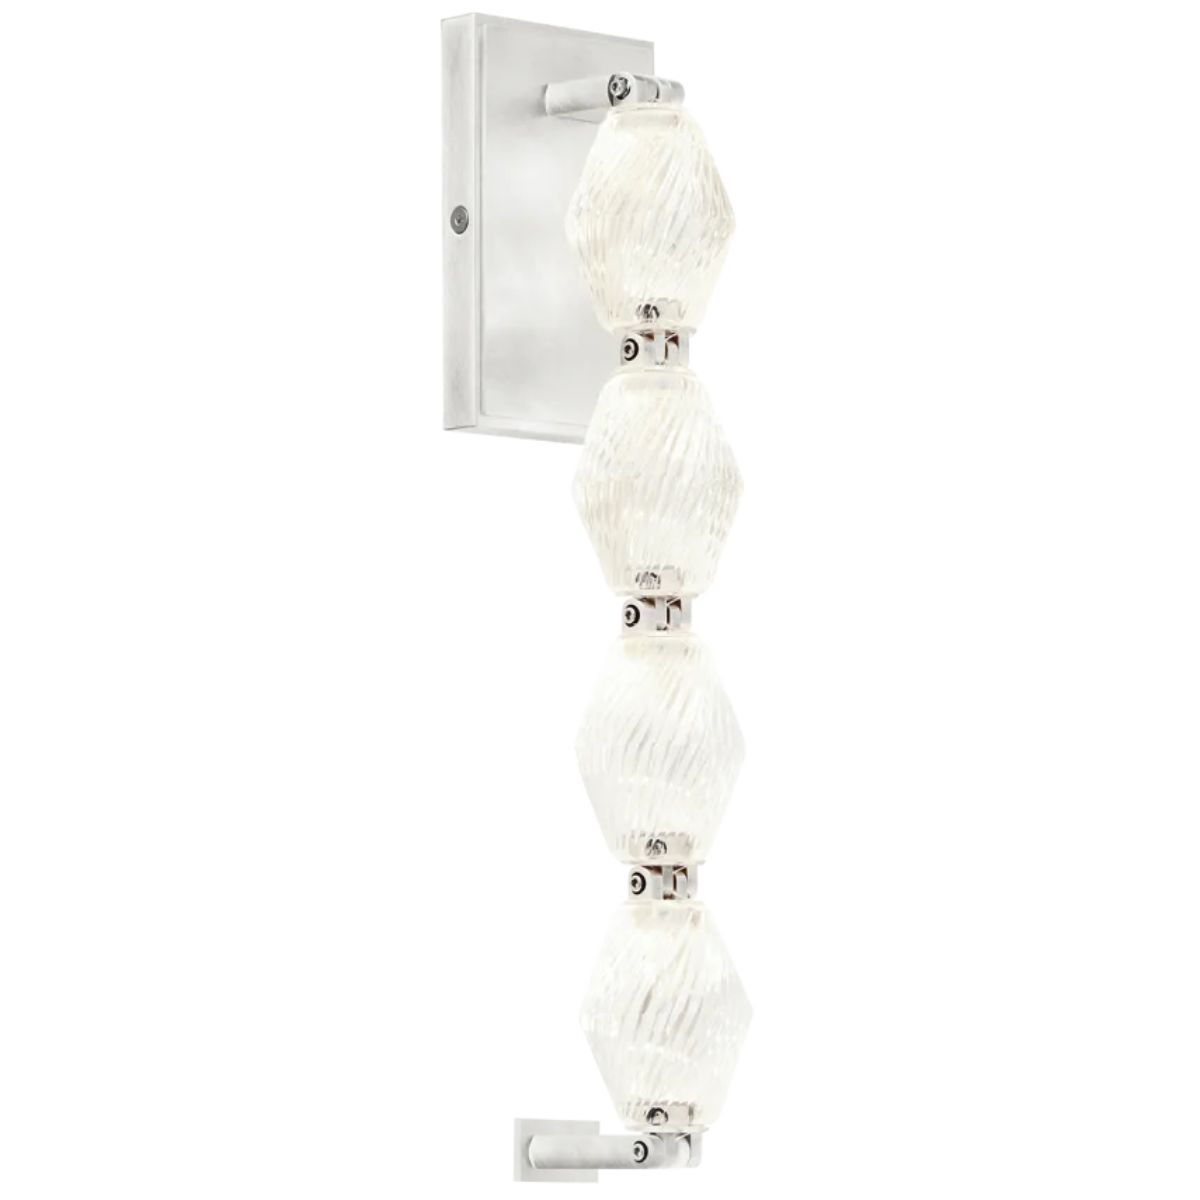 Collier 15 in. LED Wall Sconce